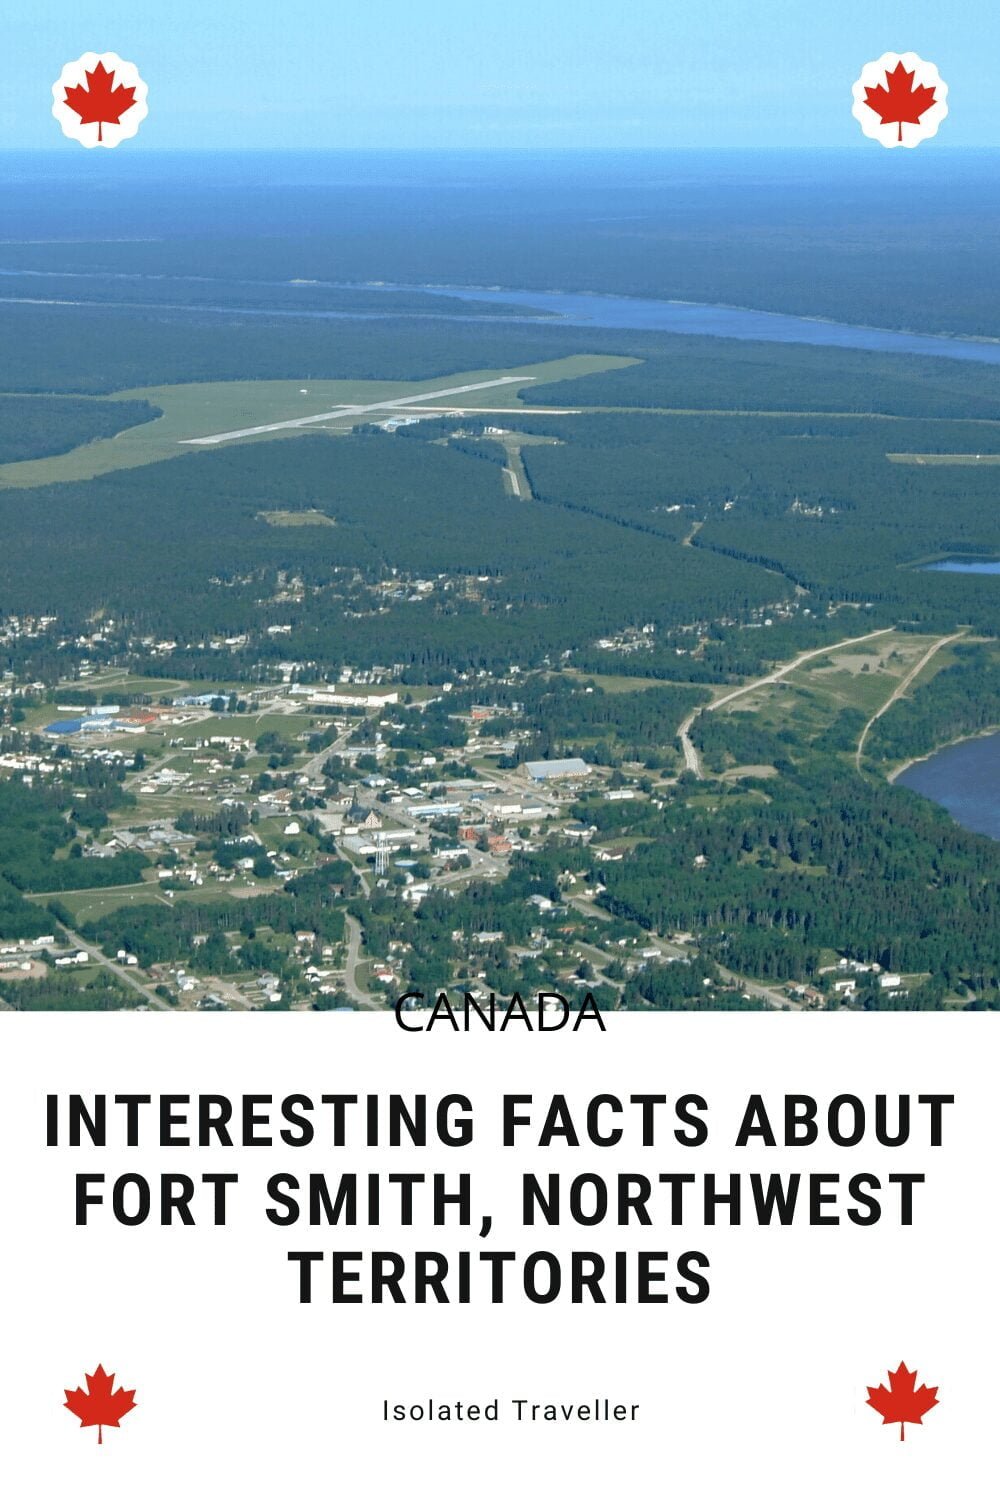 Facts About Fort Smith, Northwest Territories